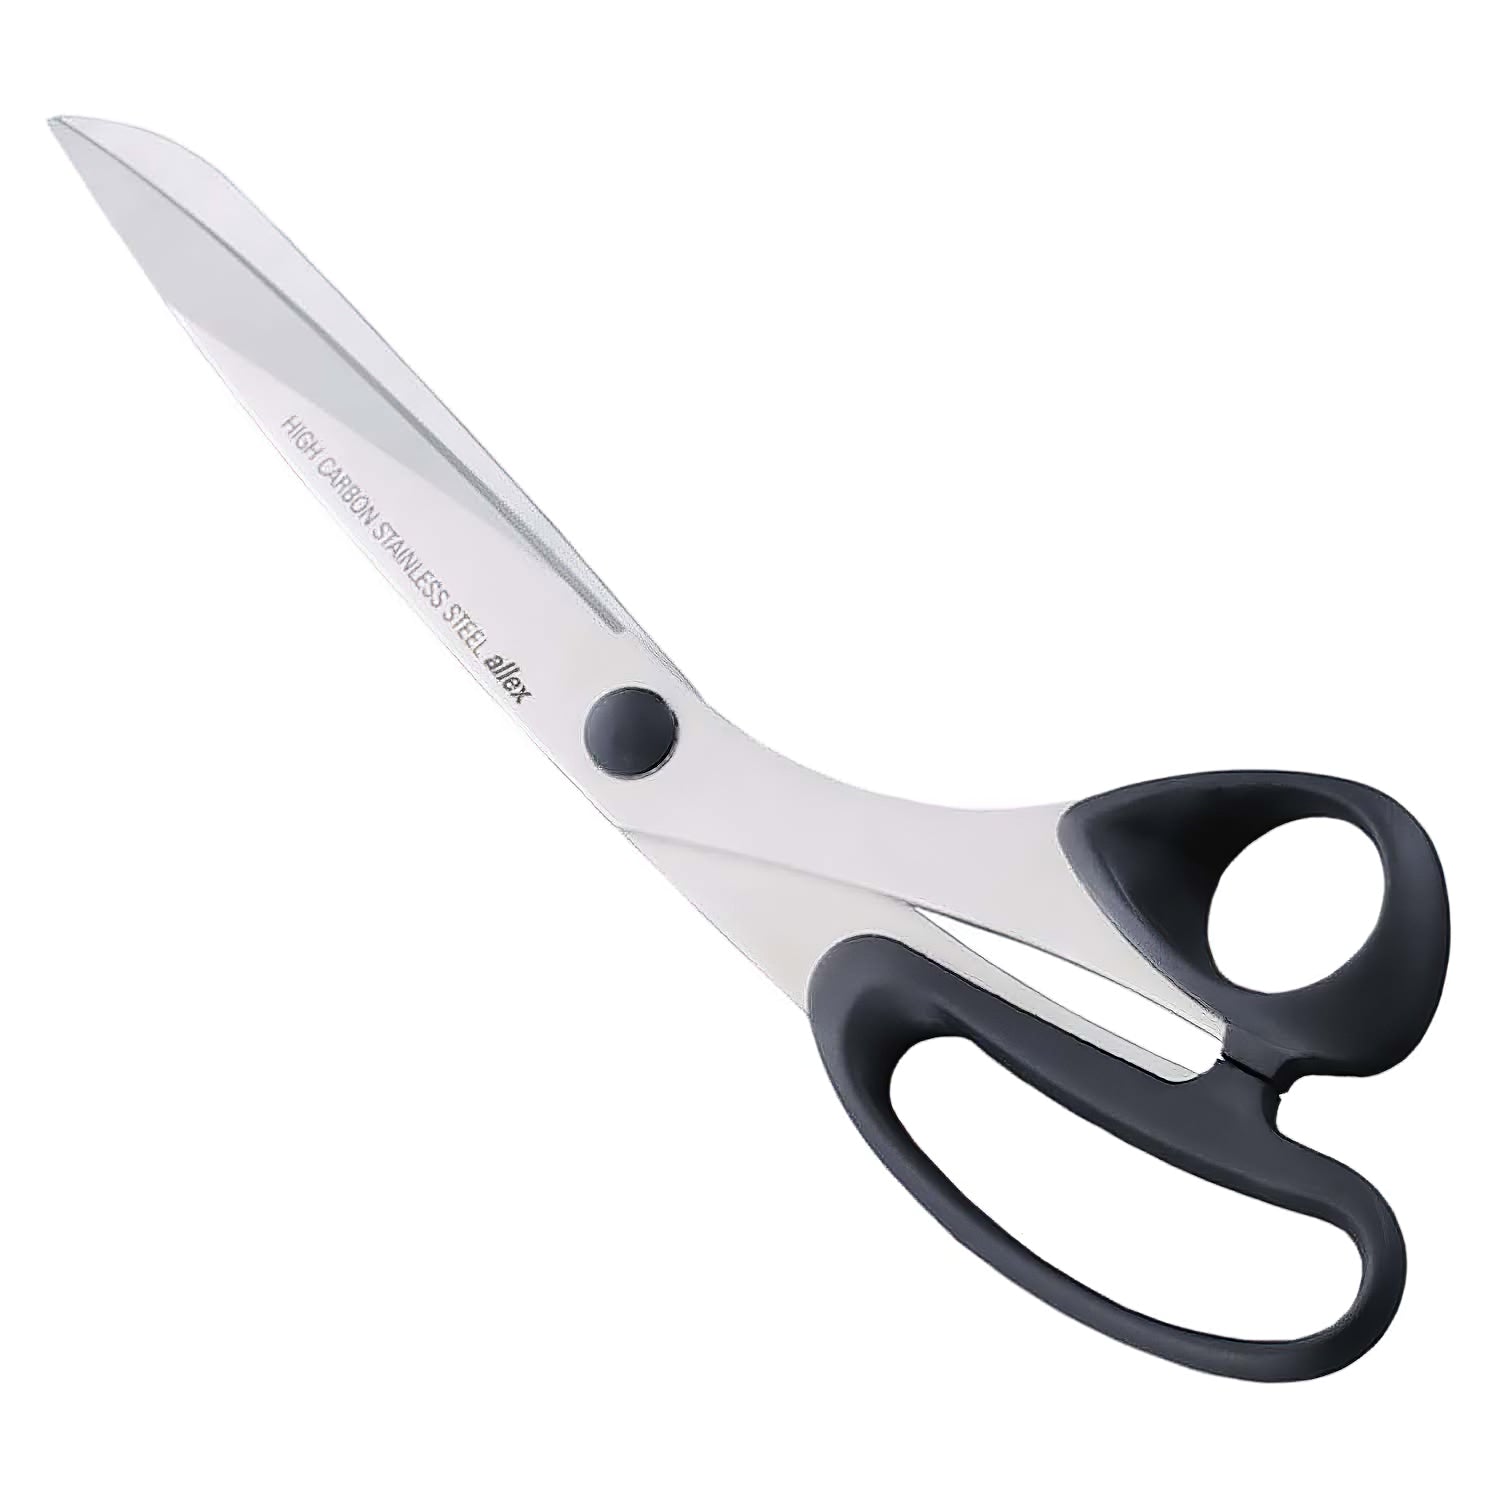 https://cdn.shopify.com/s/files/1/1610/3863/products/ALLEXHighCarbonStainlessSteelSewingScissors_1600x.jpg?v=1636878817